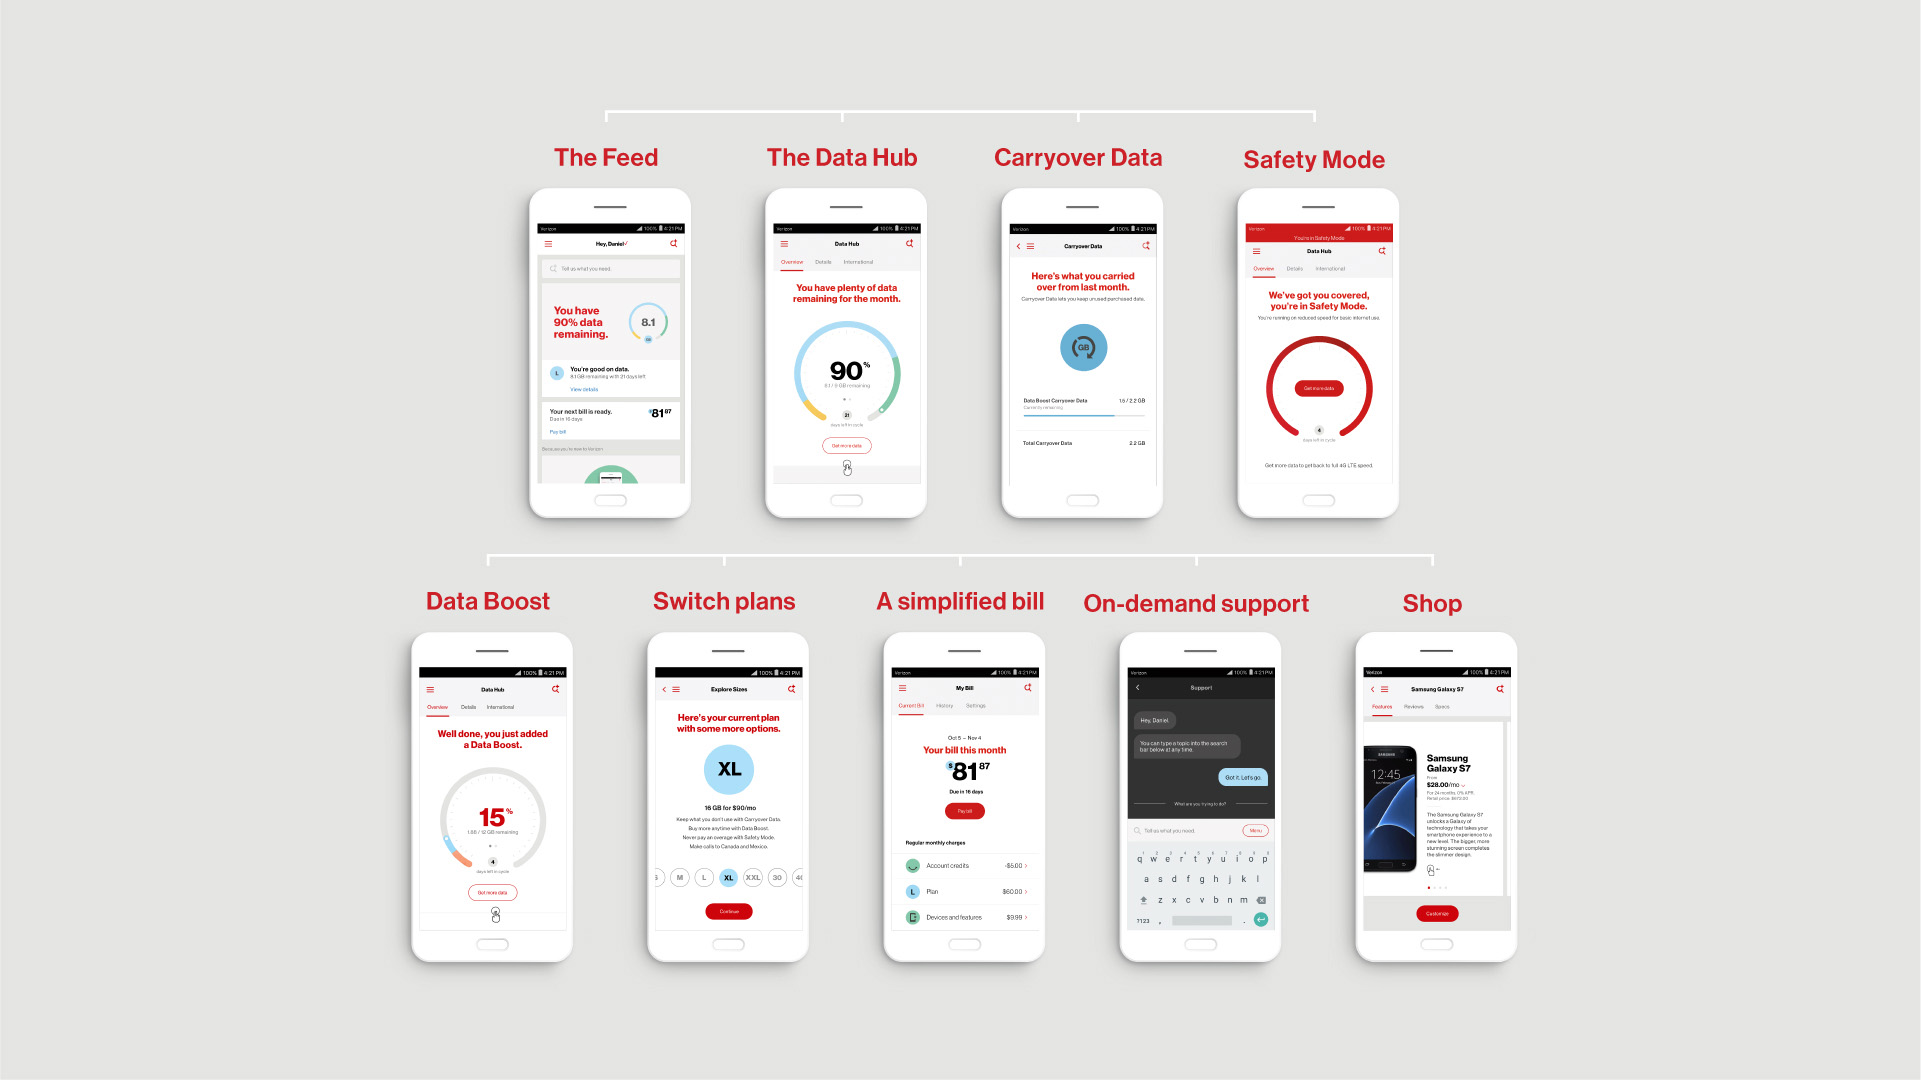 The new My Verizon app lets you access more data and new capabilities on the new Verizon Plan